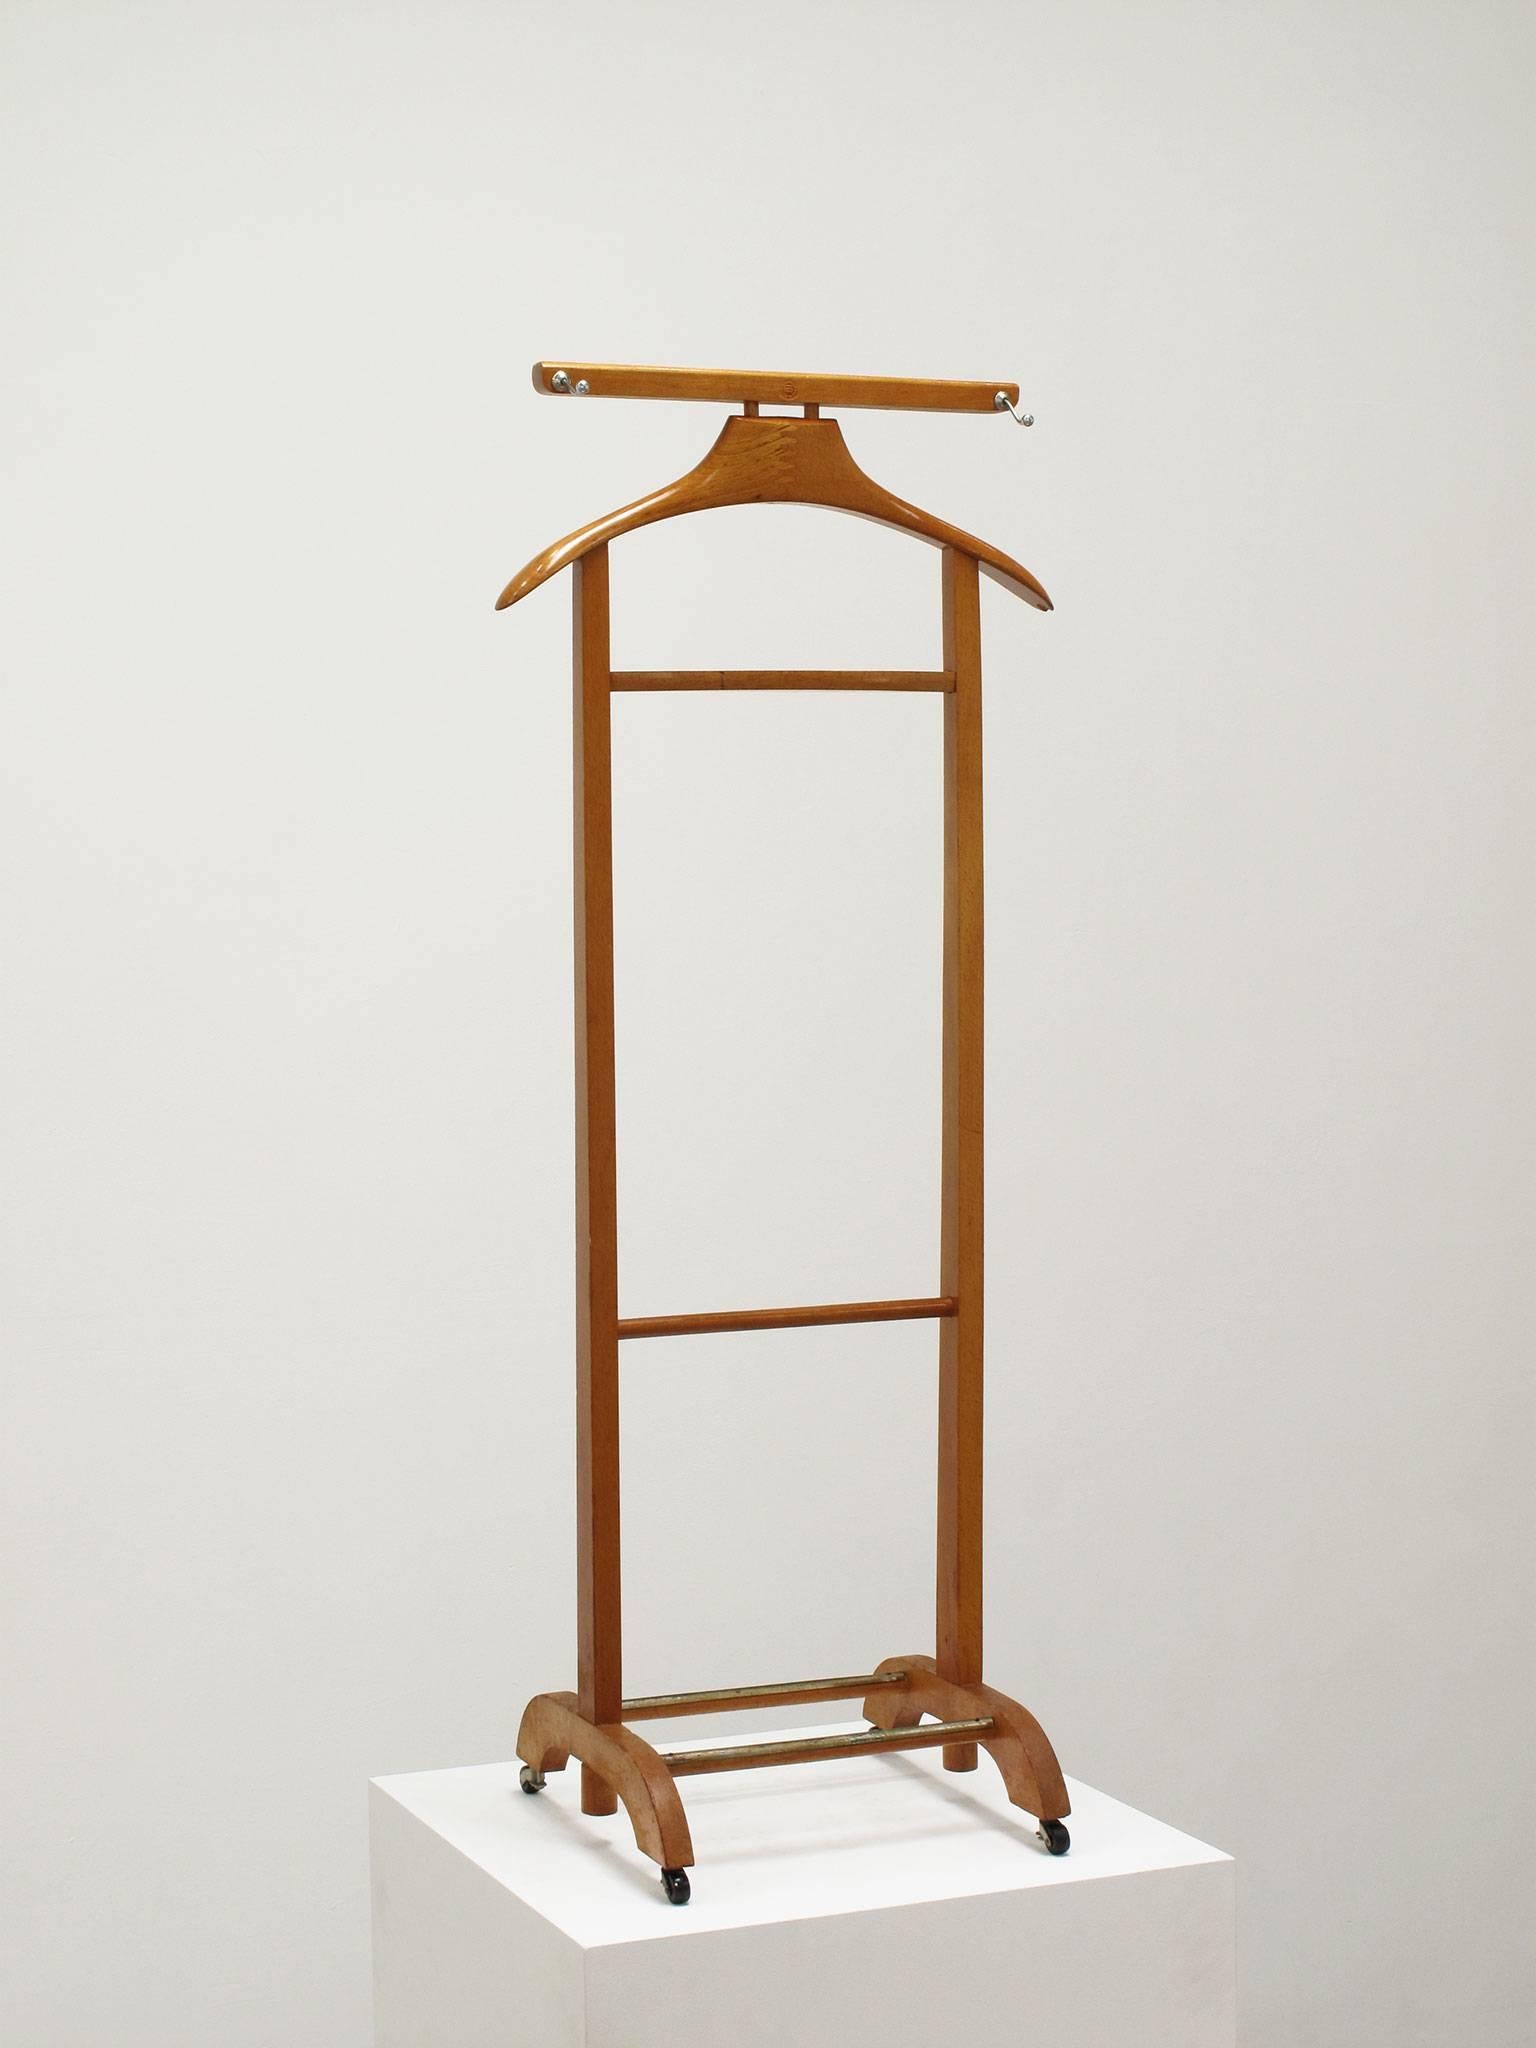 Fratelli Reguitti.
Valet apparel stand, wood, Italy, 1960s.
Measurements in inches:
43.5 high x 17.75 wide x 13.75 deep.